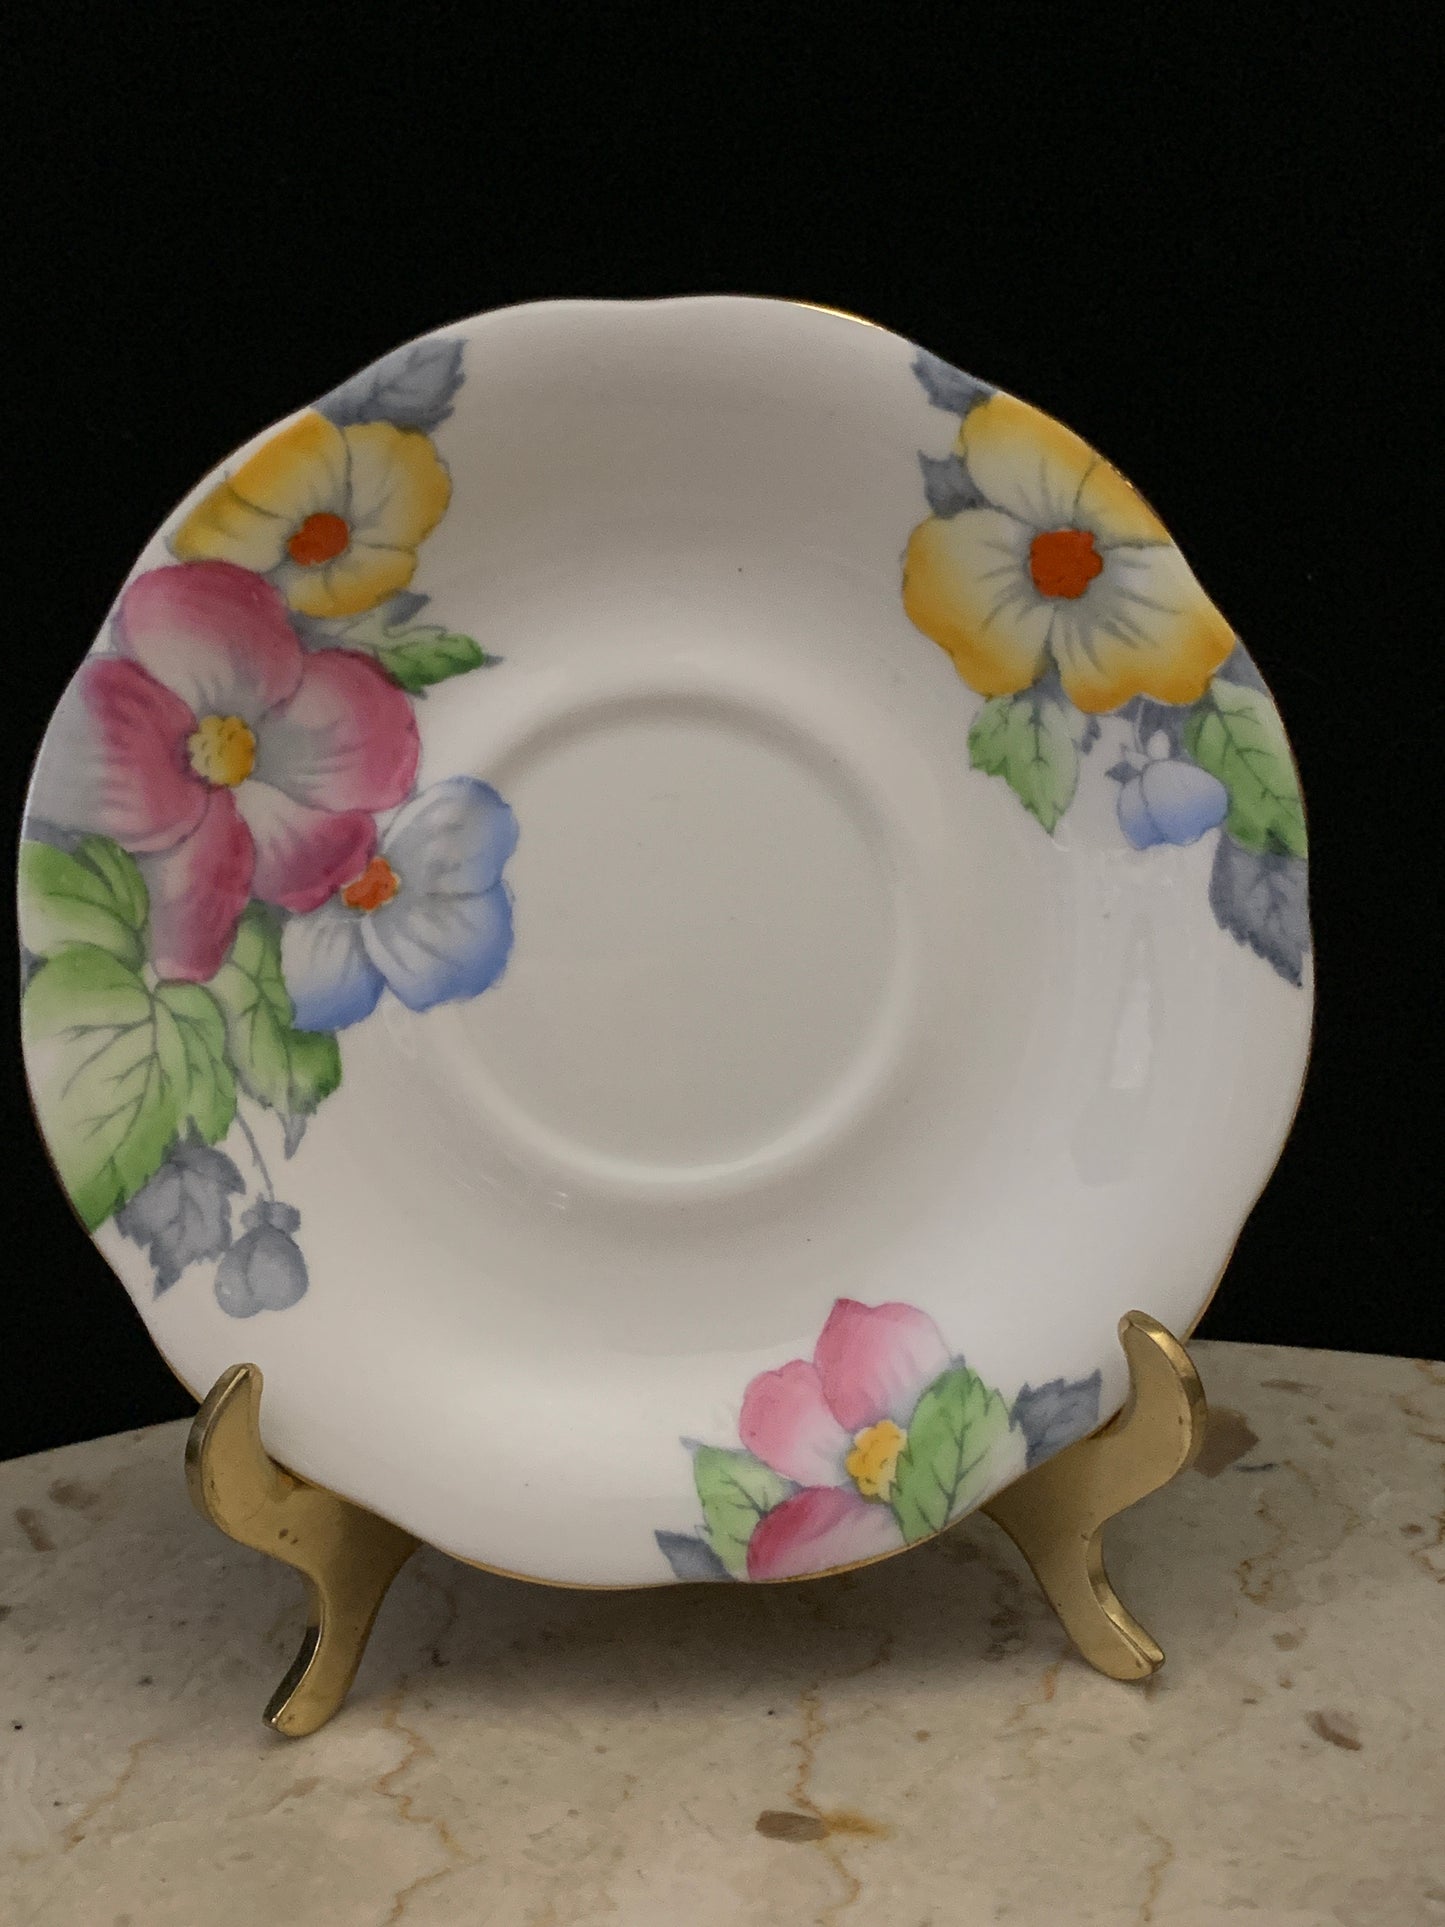 Hand Painted Blue, Pink, and Yellow Floral Tea Cup Bell China Vintage Teacup and Saucer